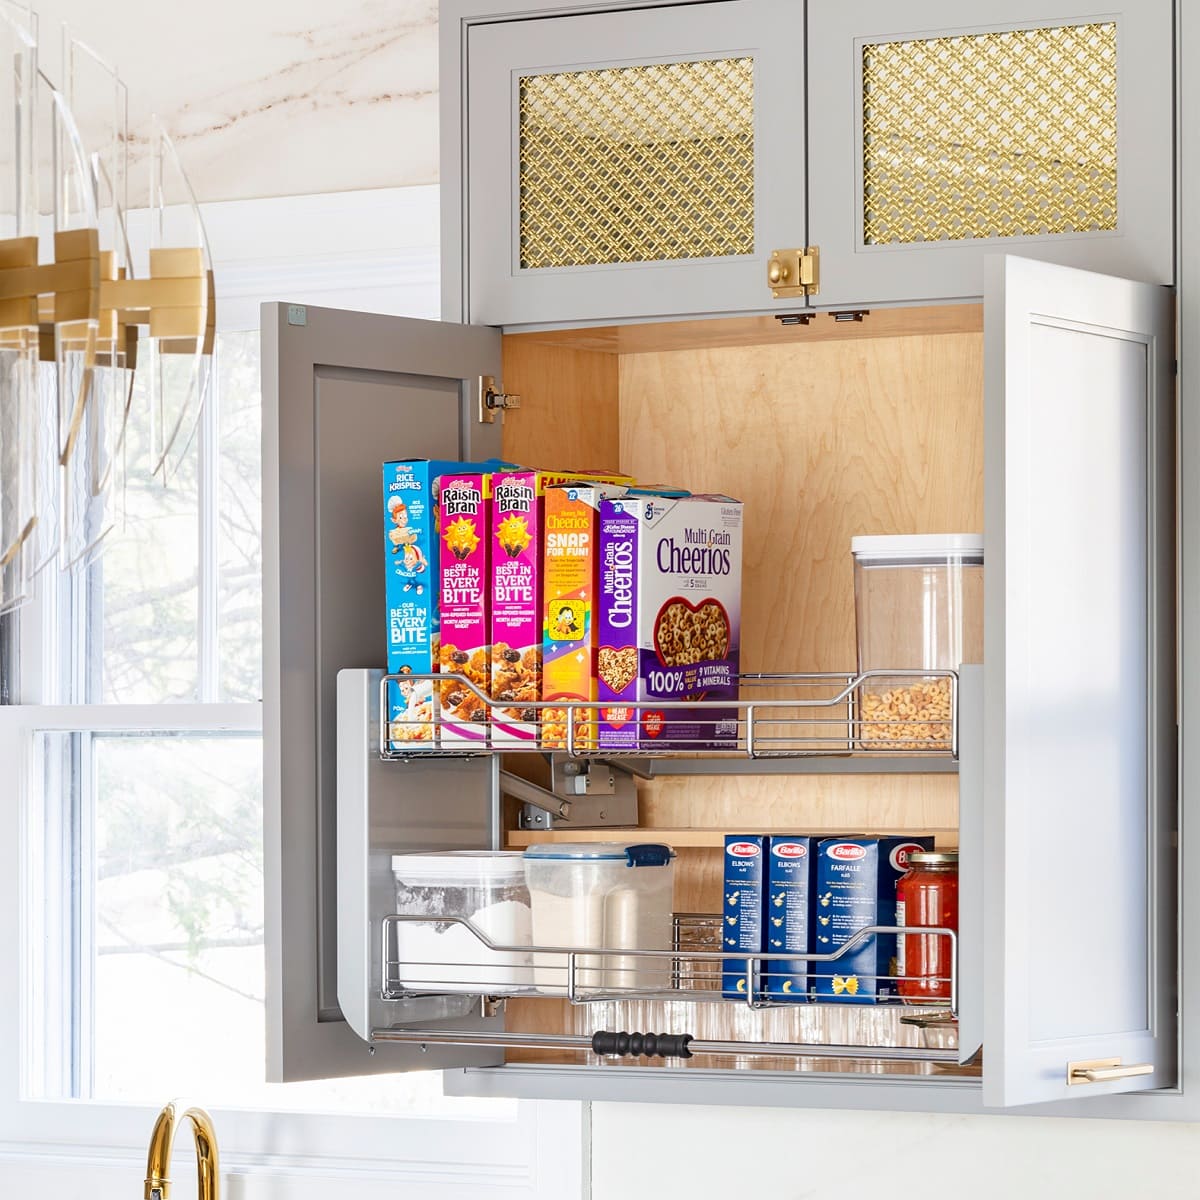 How To Cut Down A Pantry Cabinet